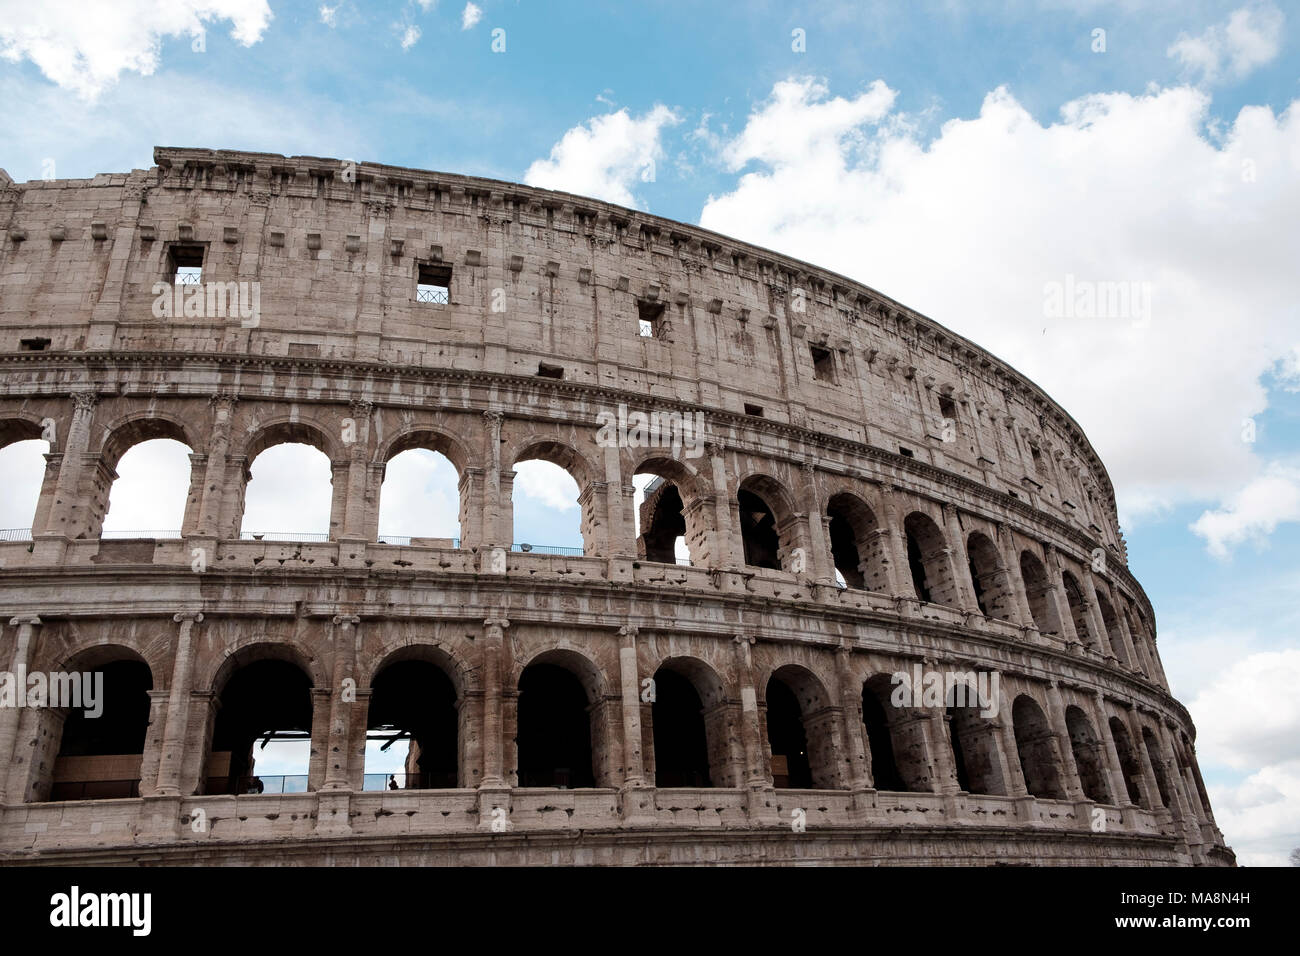 The remains of the Colosseum, Rome Stock Photo